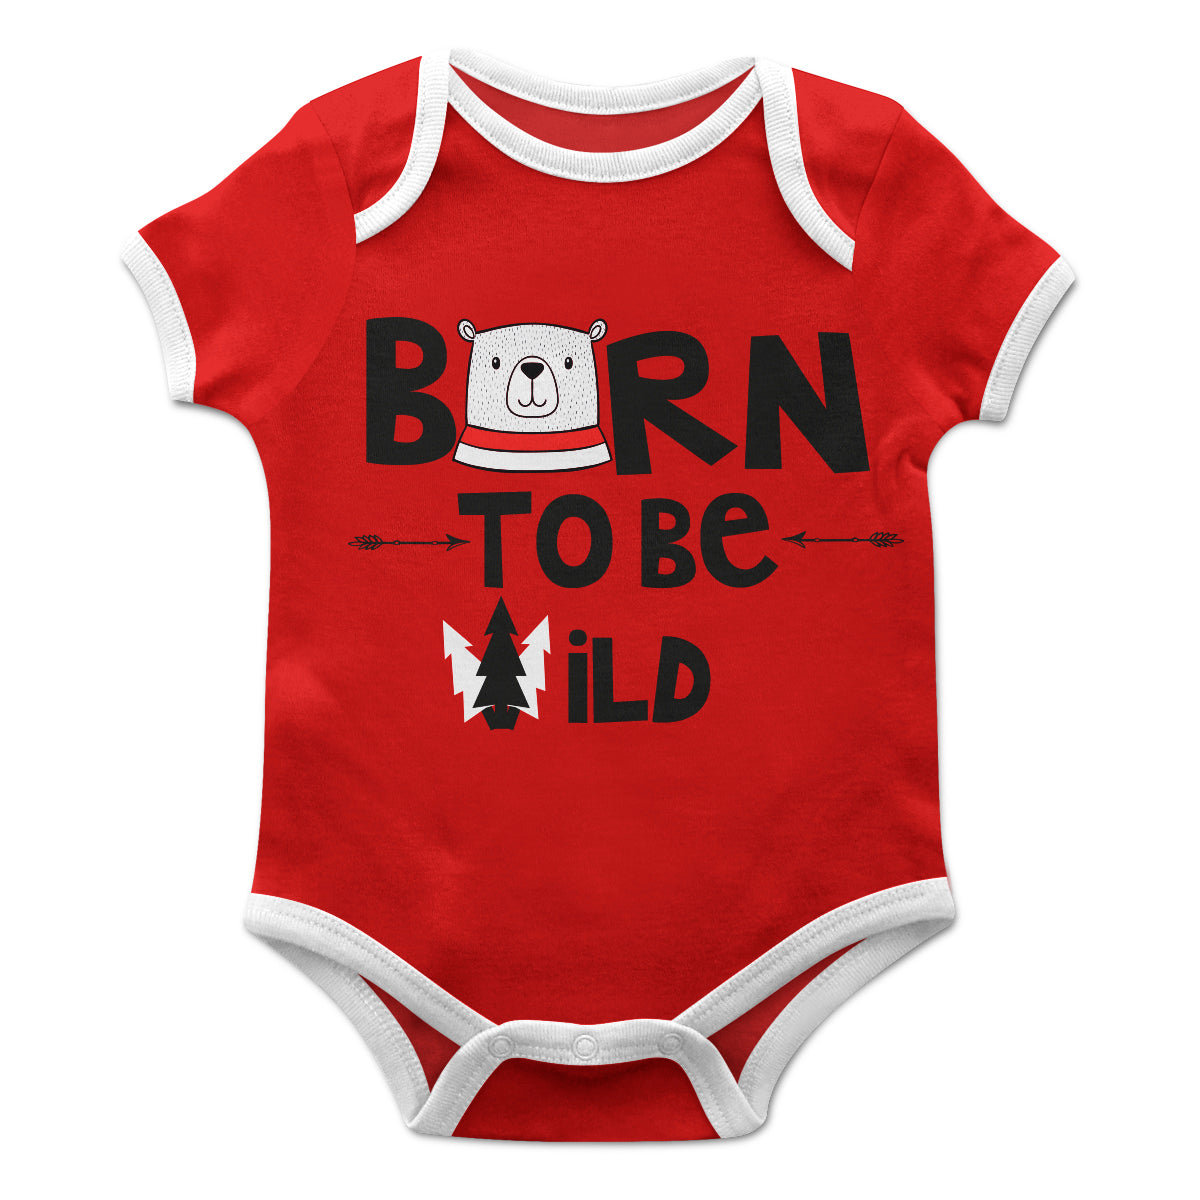 Boys red born to be wild short sleeve onesie - Wimziy&Co.